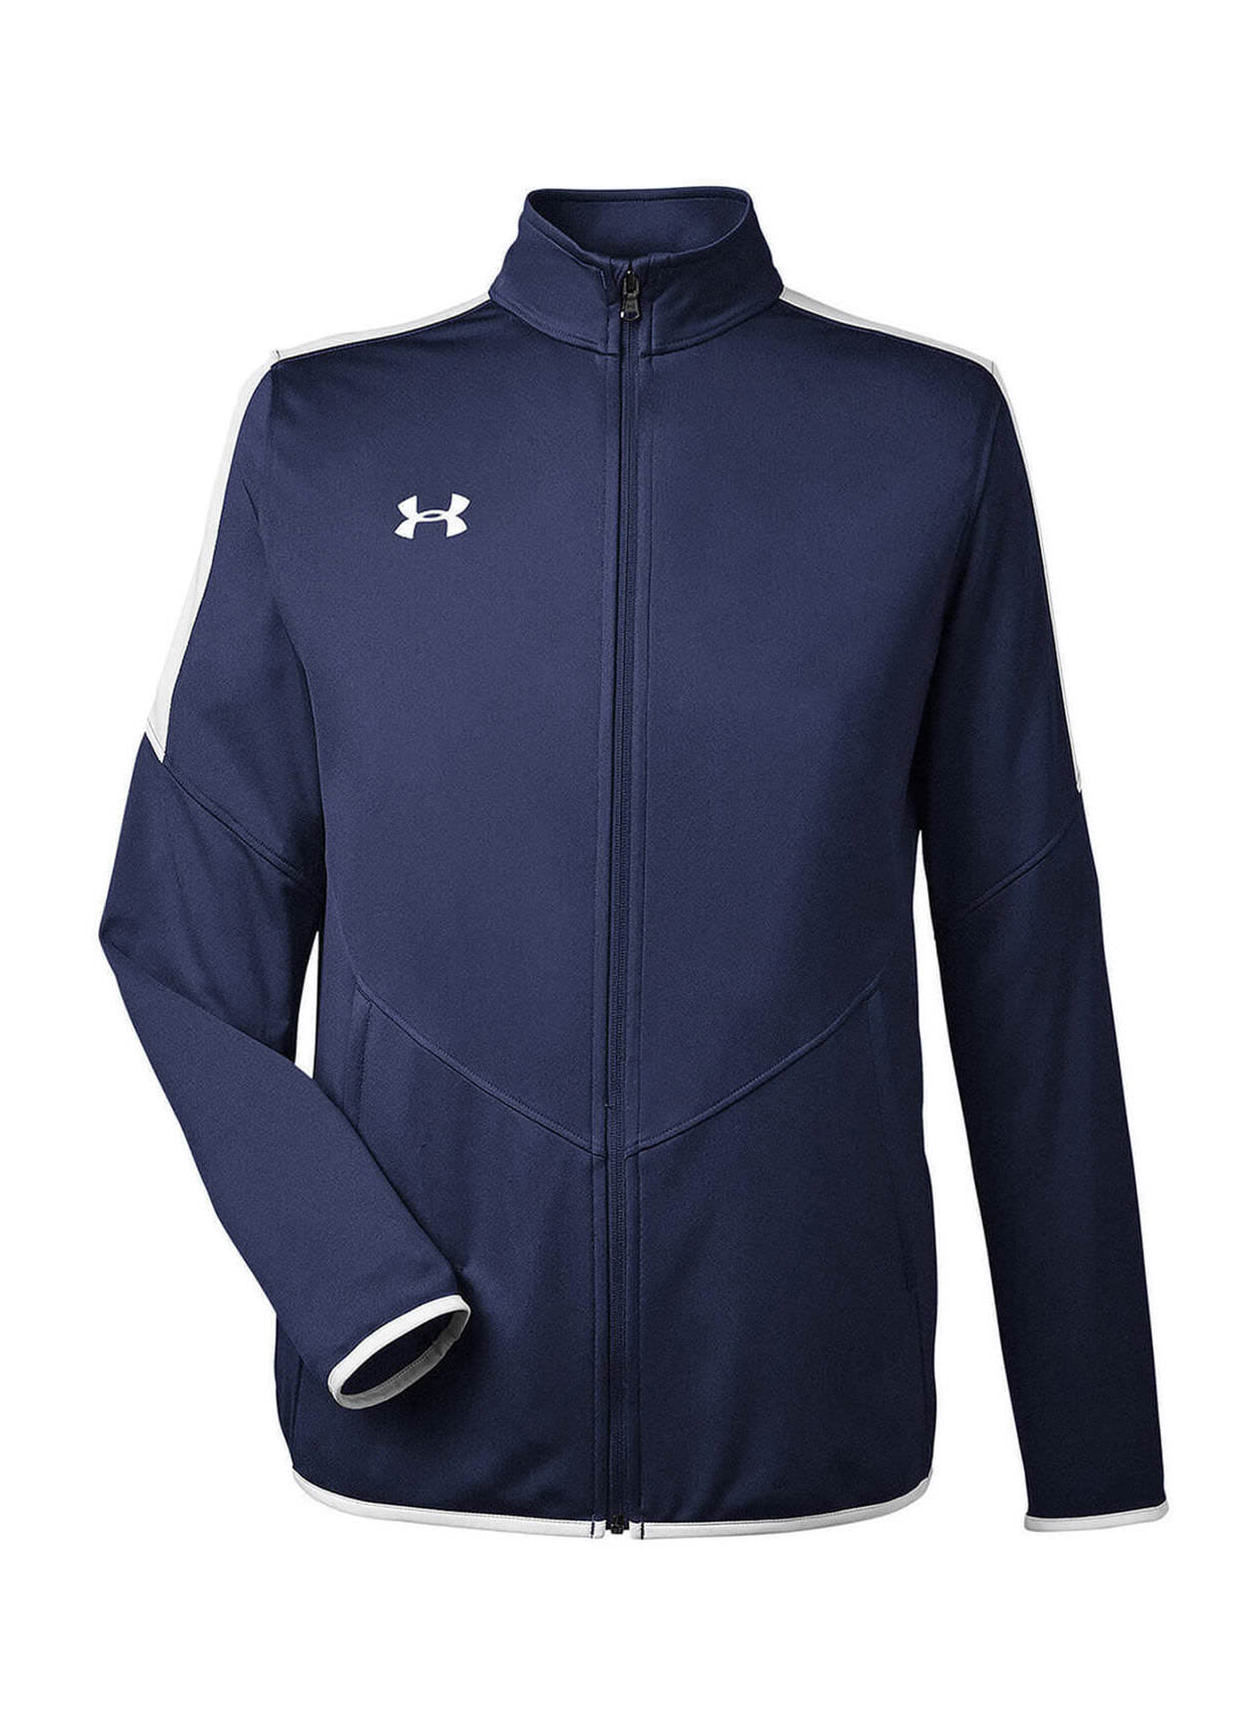 Under Armour Men's Navy Rival Knit Jacket